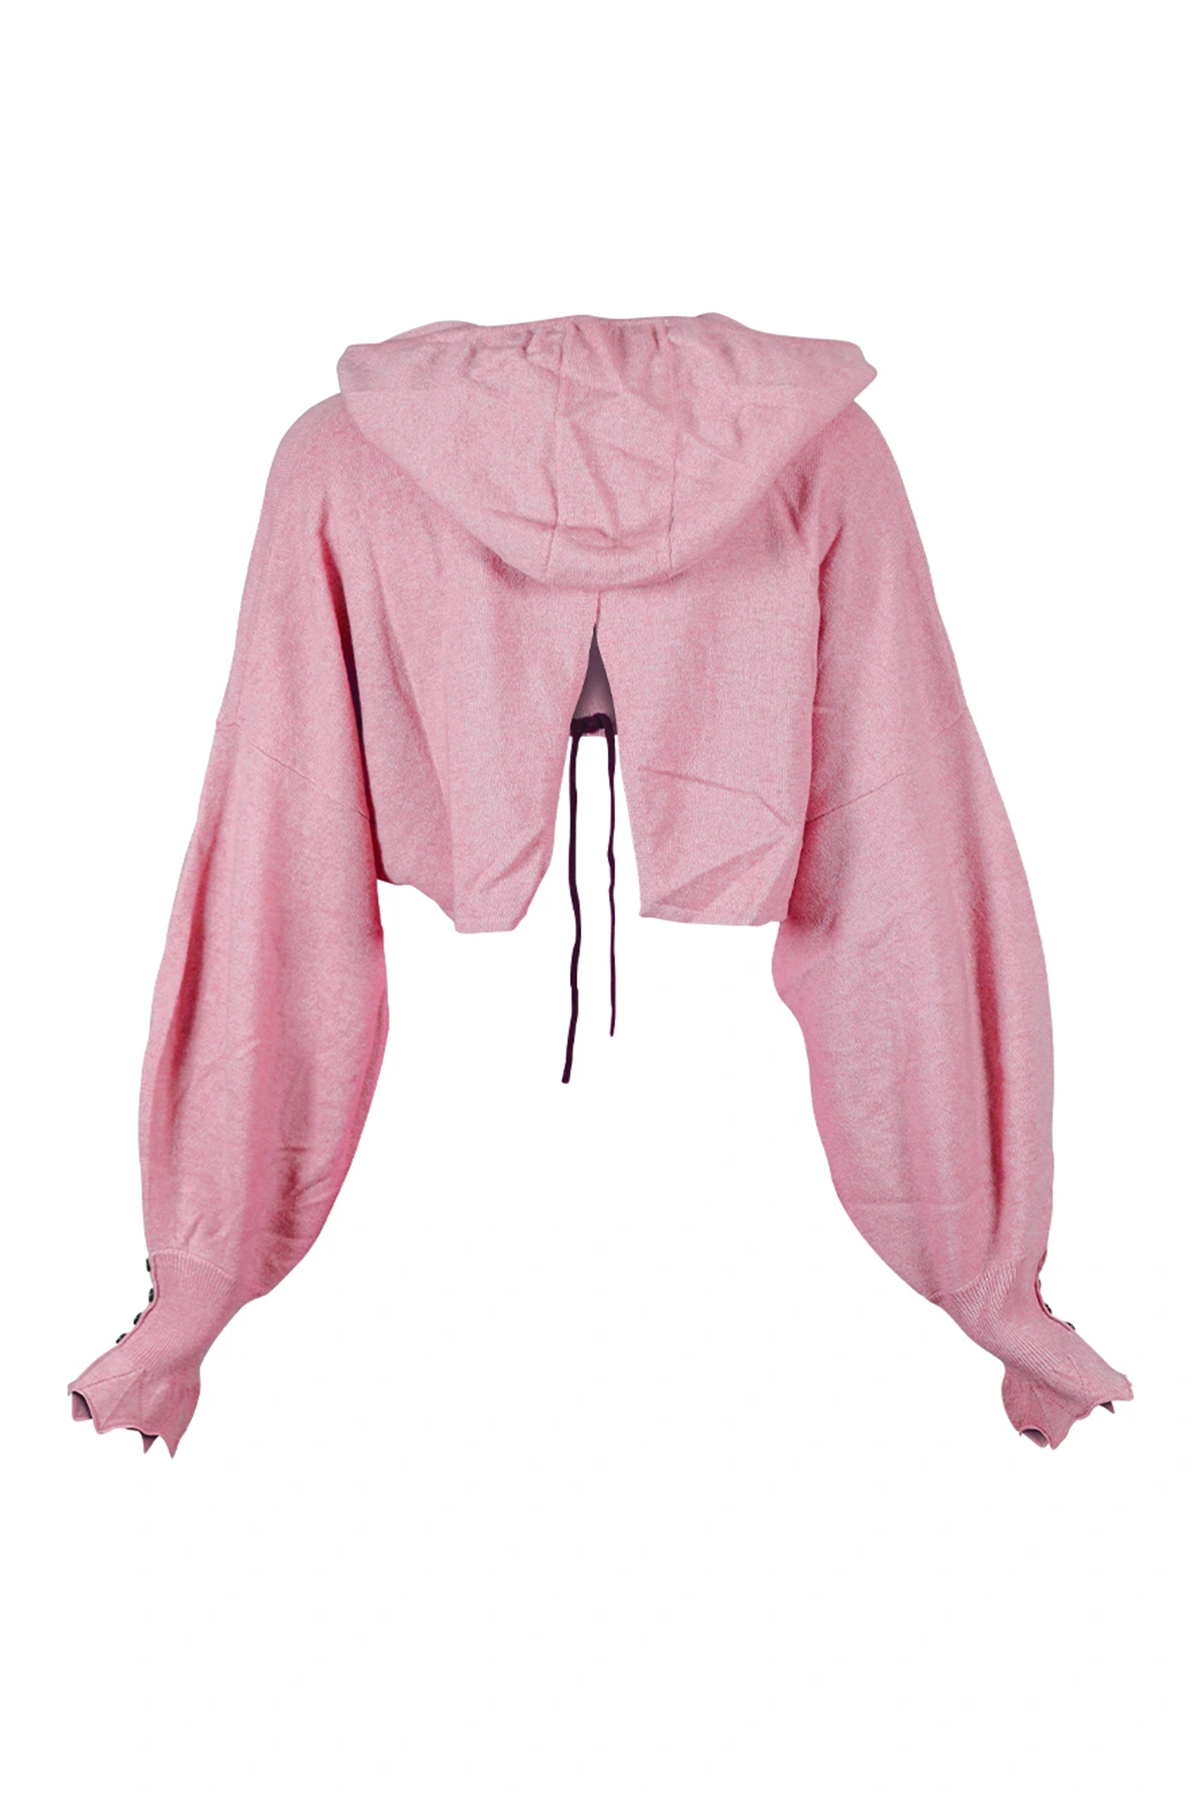 Cashmere Crop top with Detachable Hoodie